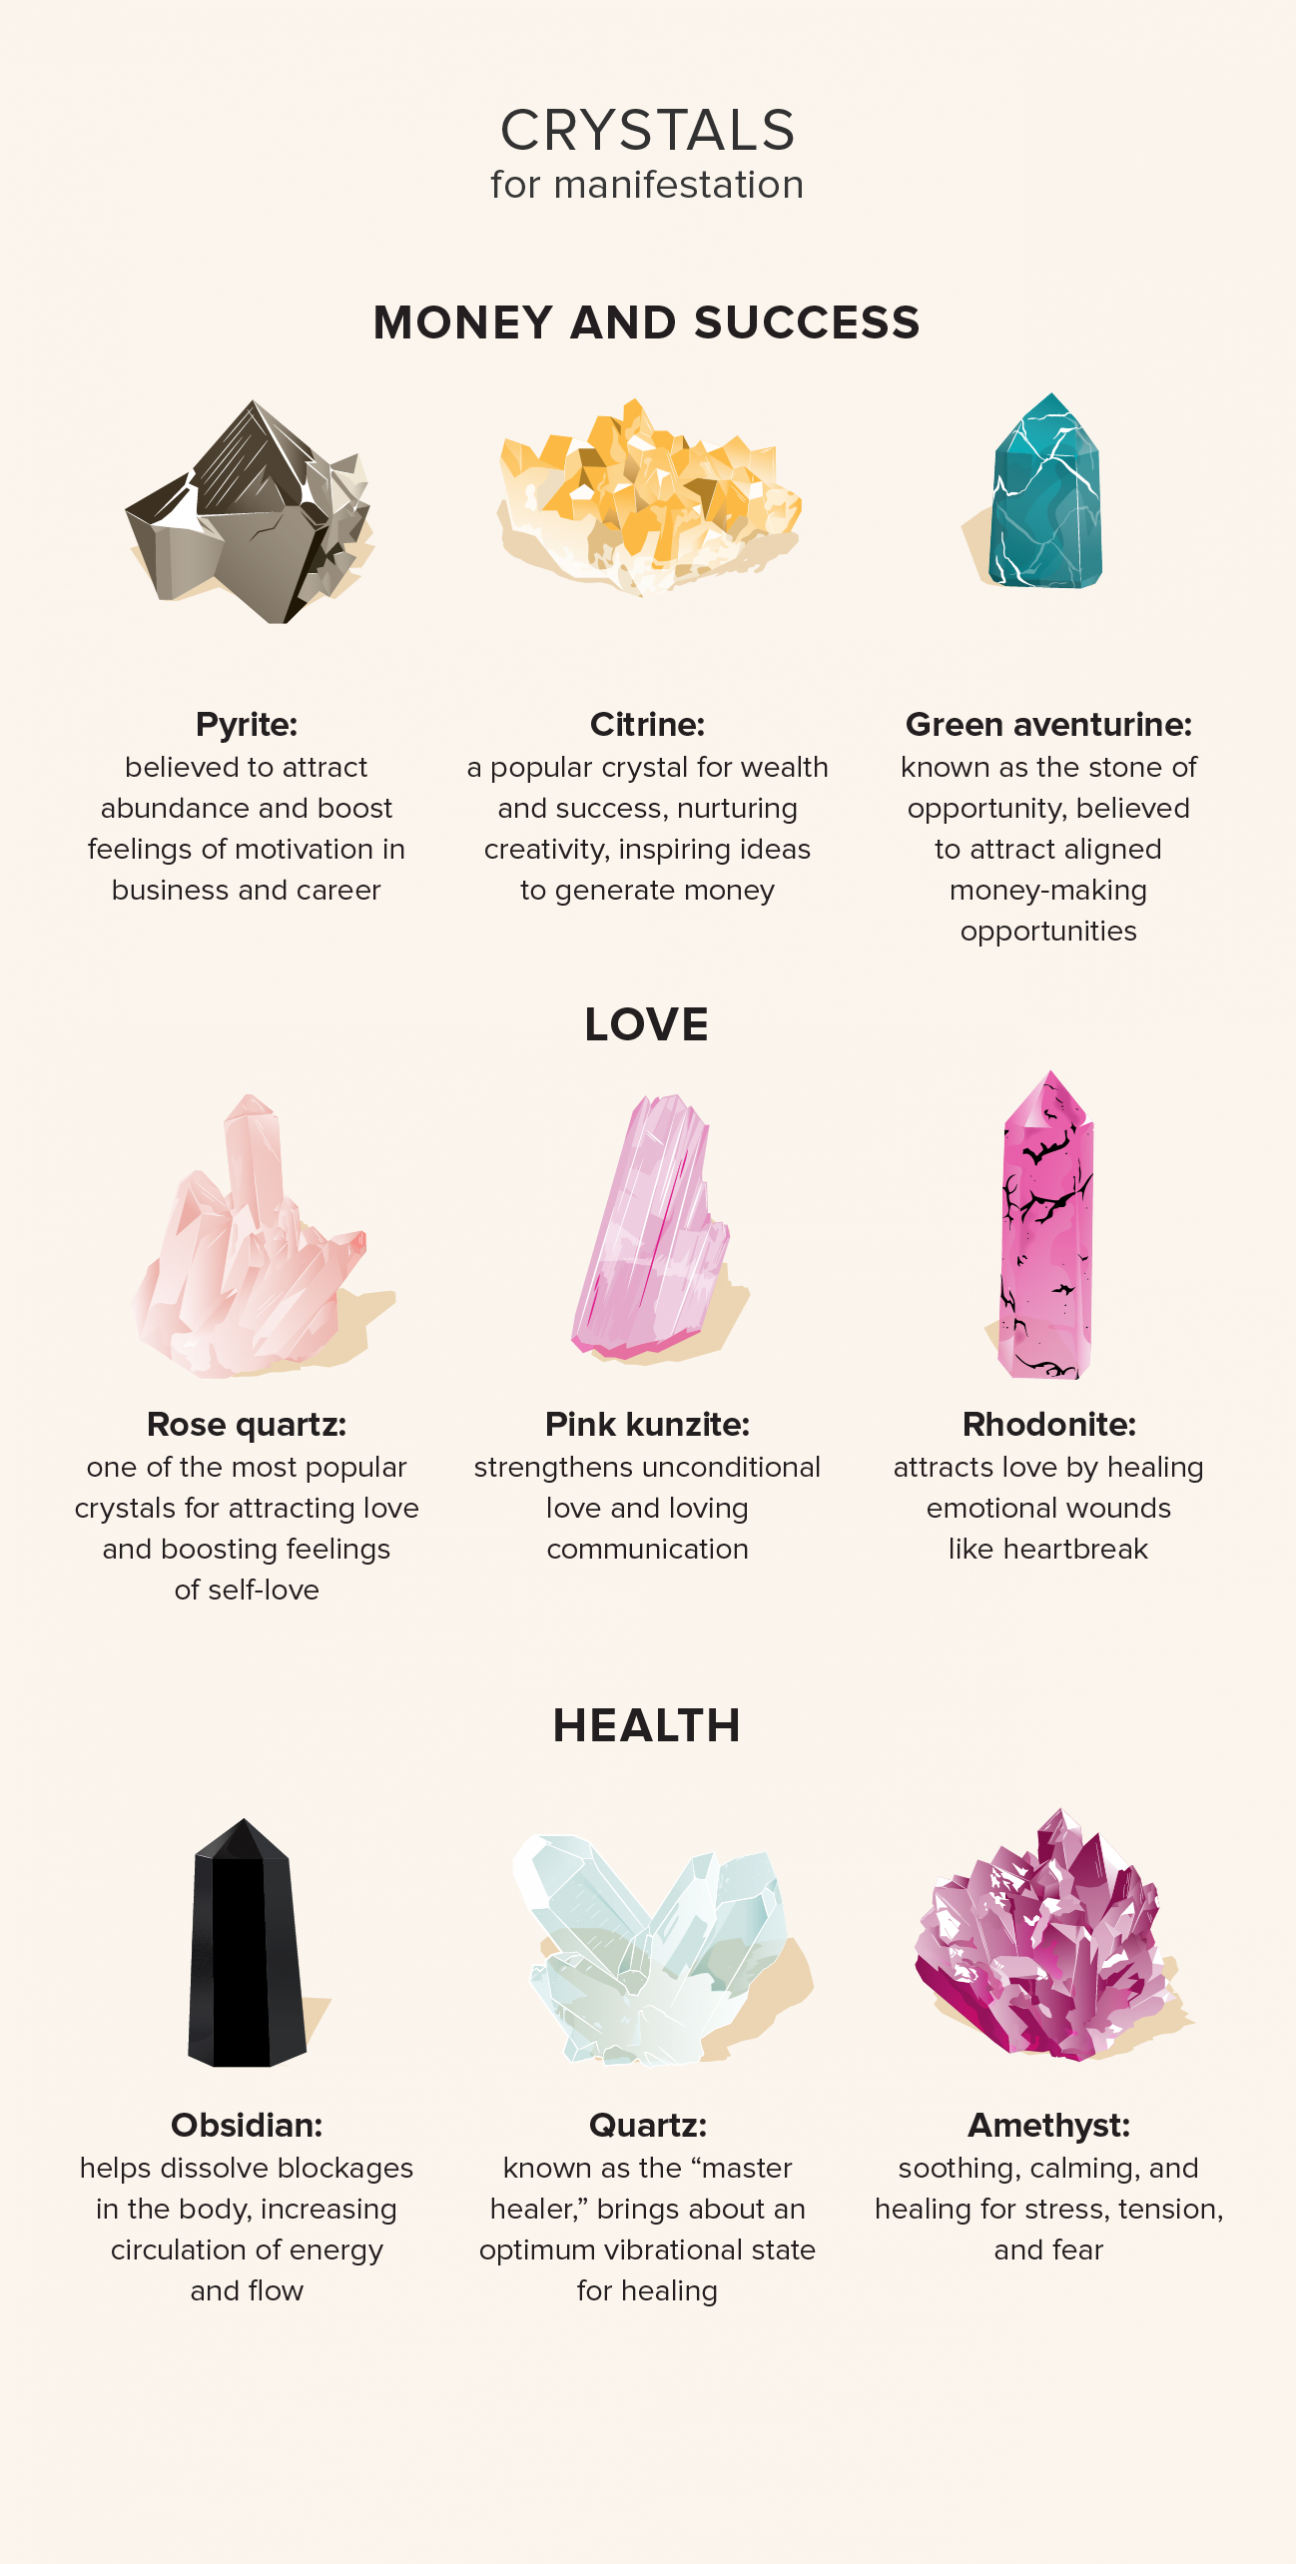 What Crystals Are Good For Manifestation?